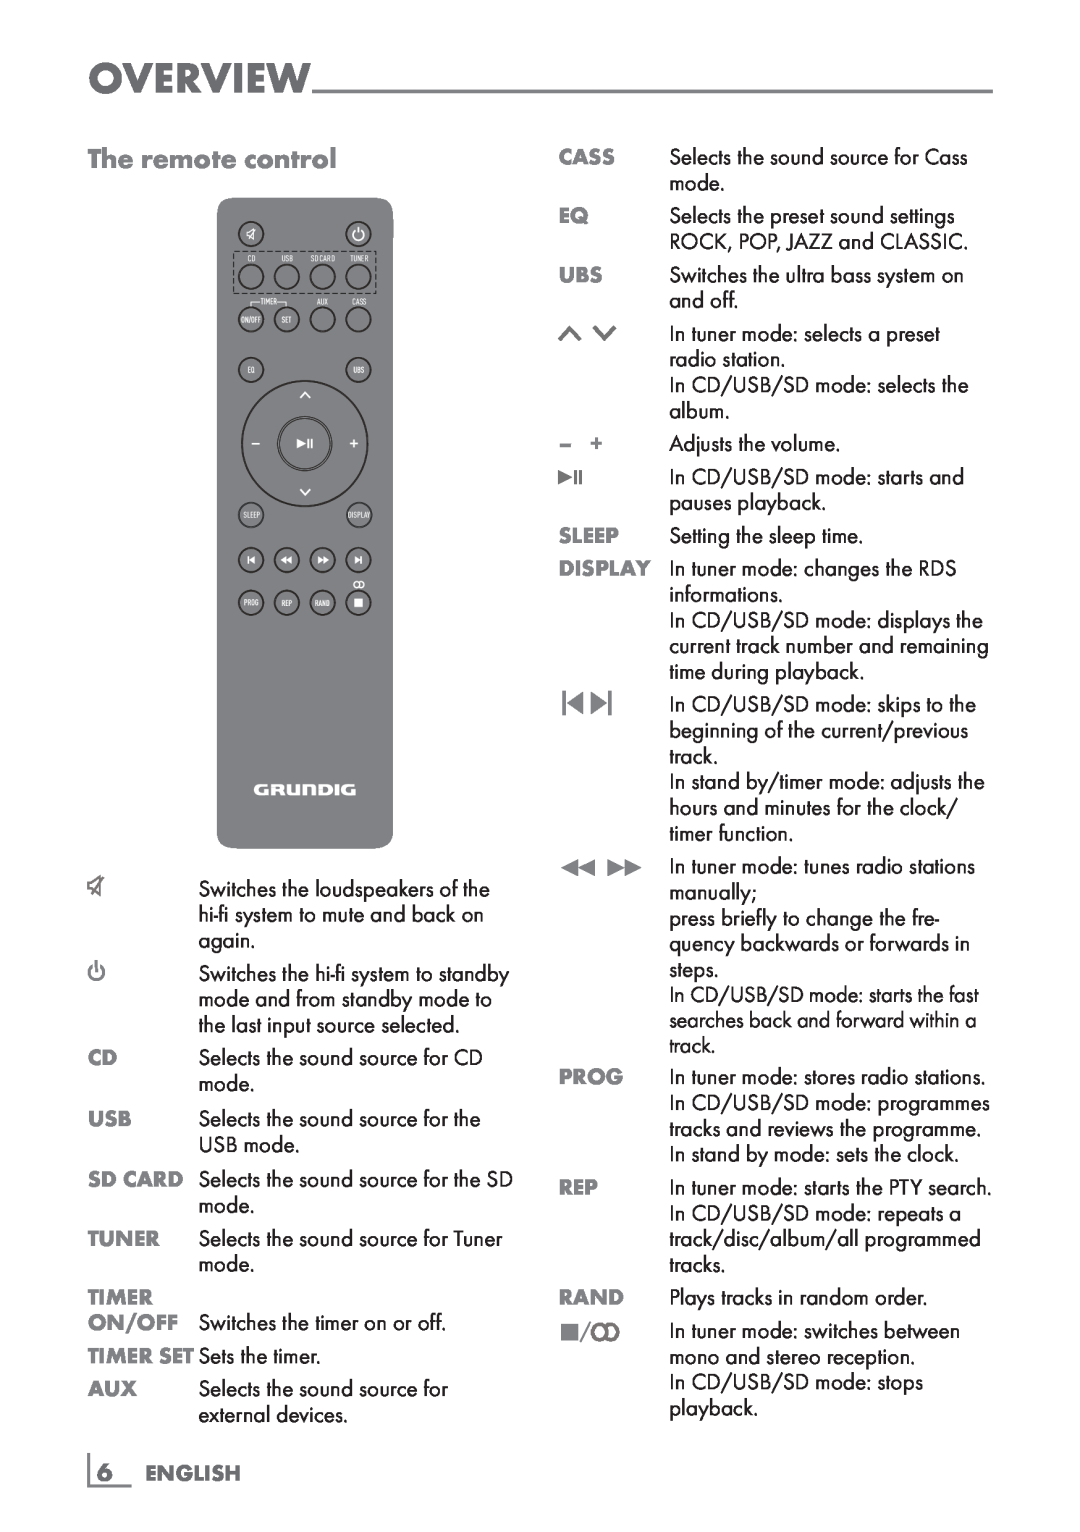 Grundig UMS 2020 manual The remote control, Timer­, 6­ ENGLISH, mono and stereo reception 